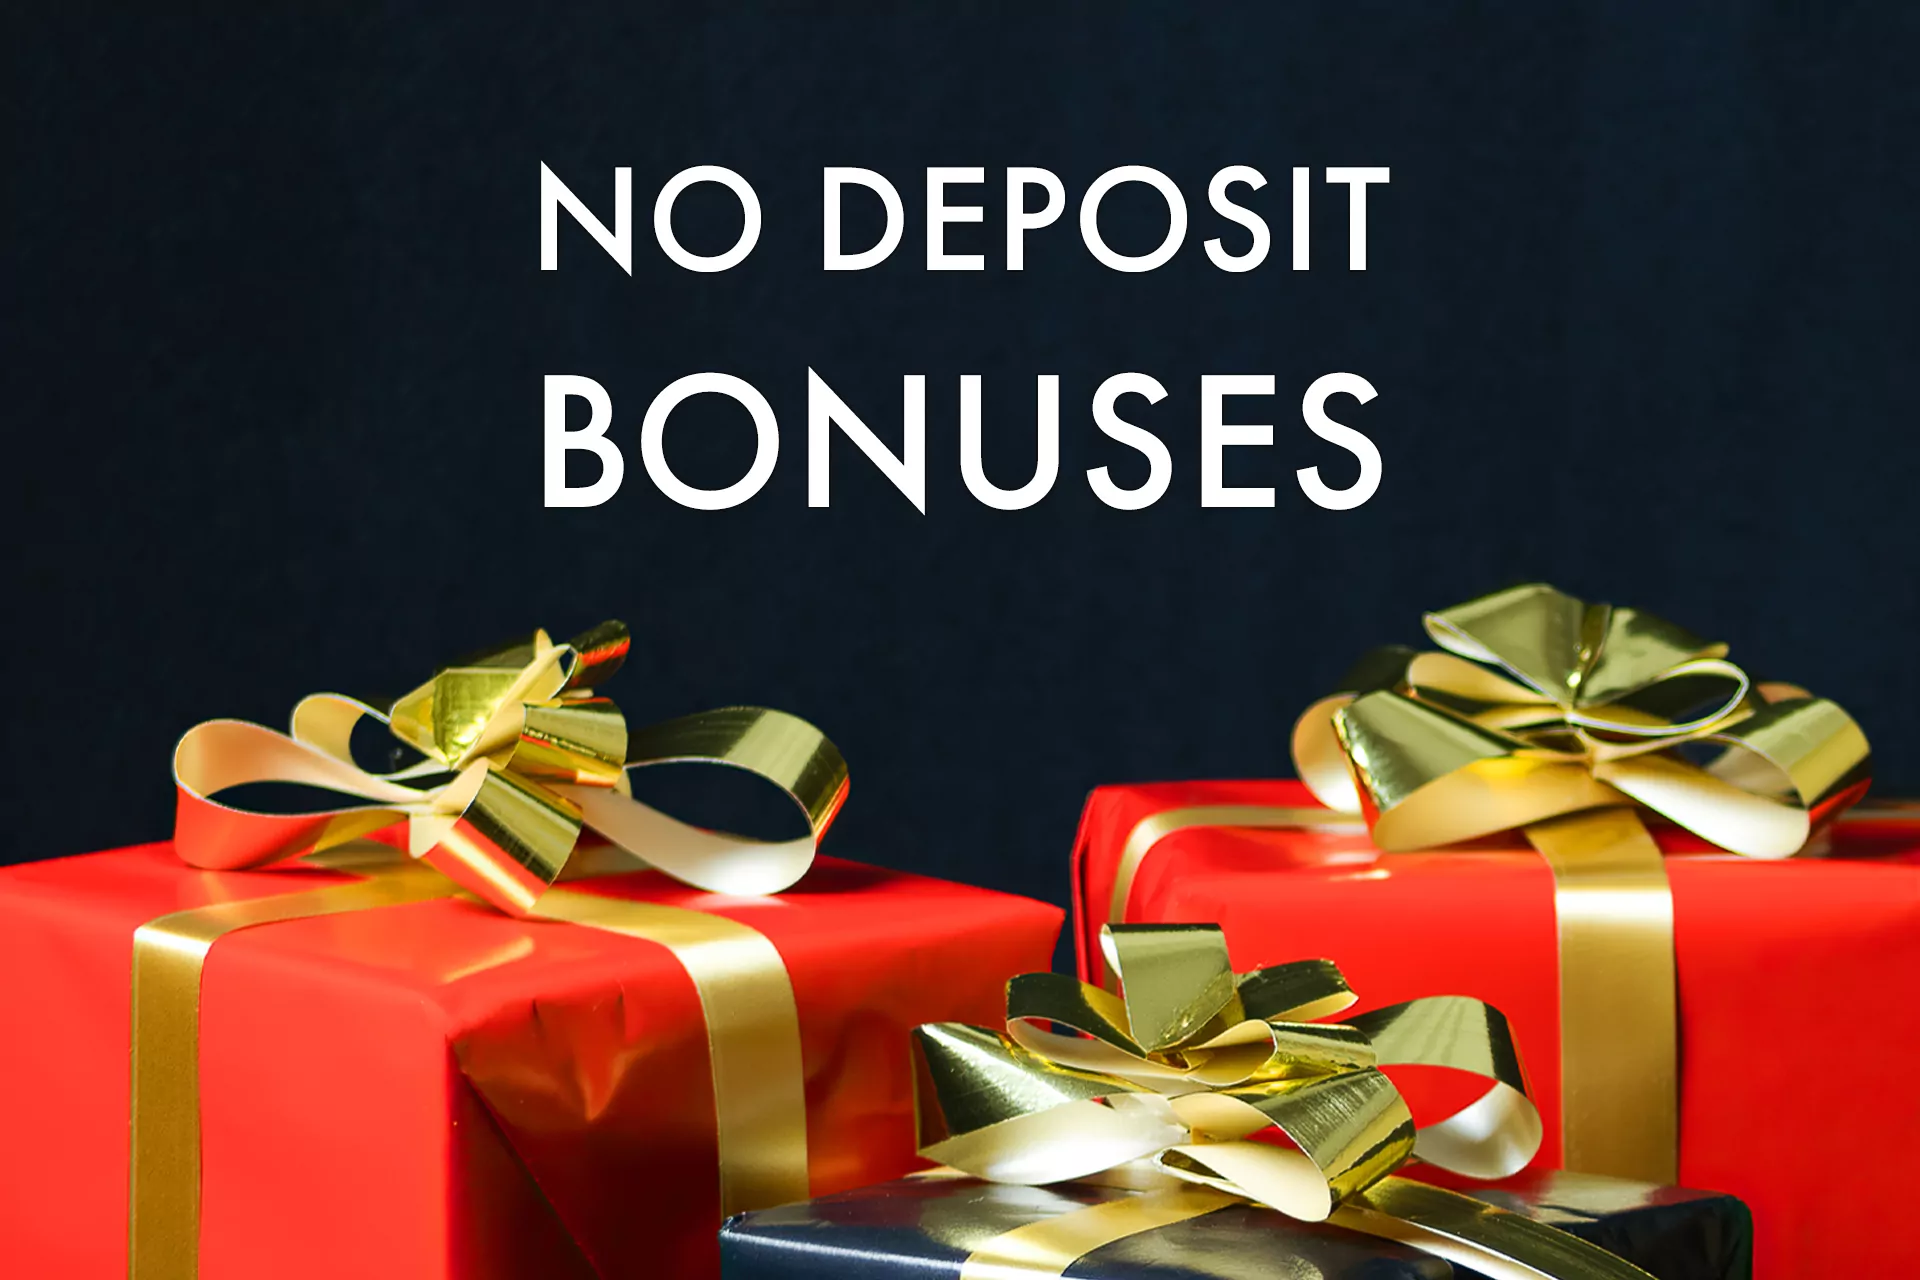 No deposit bonus usually is rare and does not require depositing for activating a new account at a betting site.